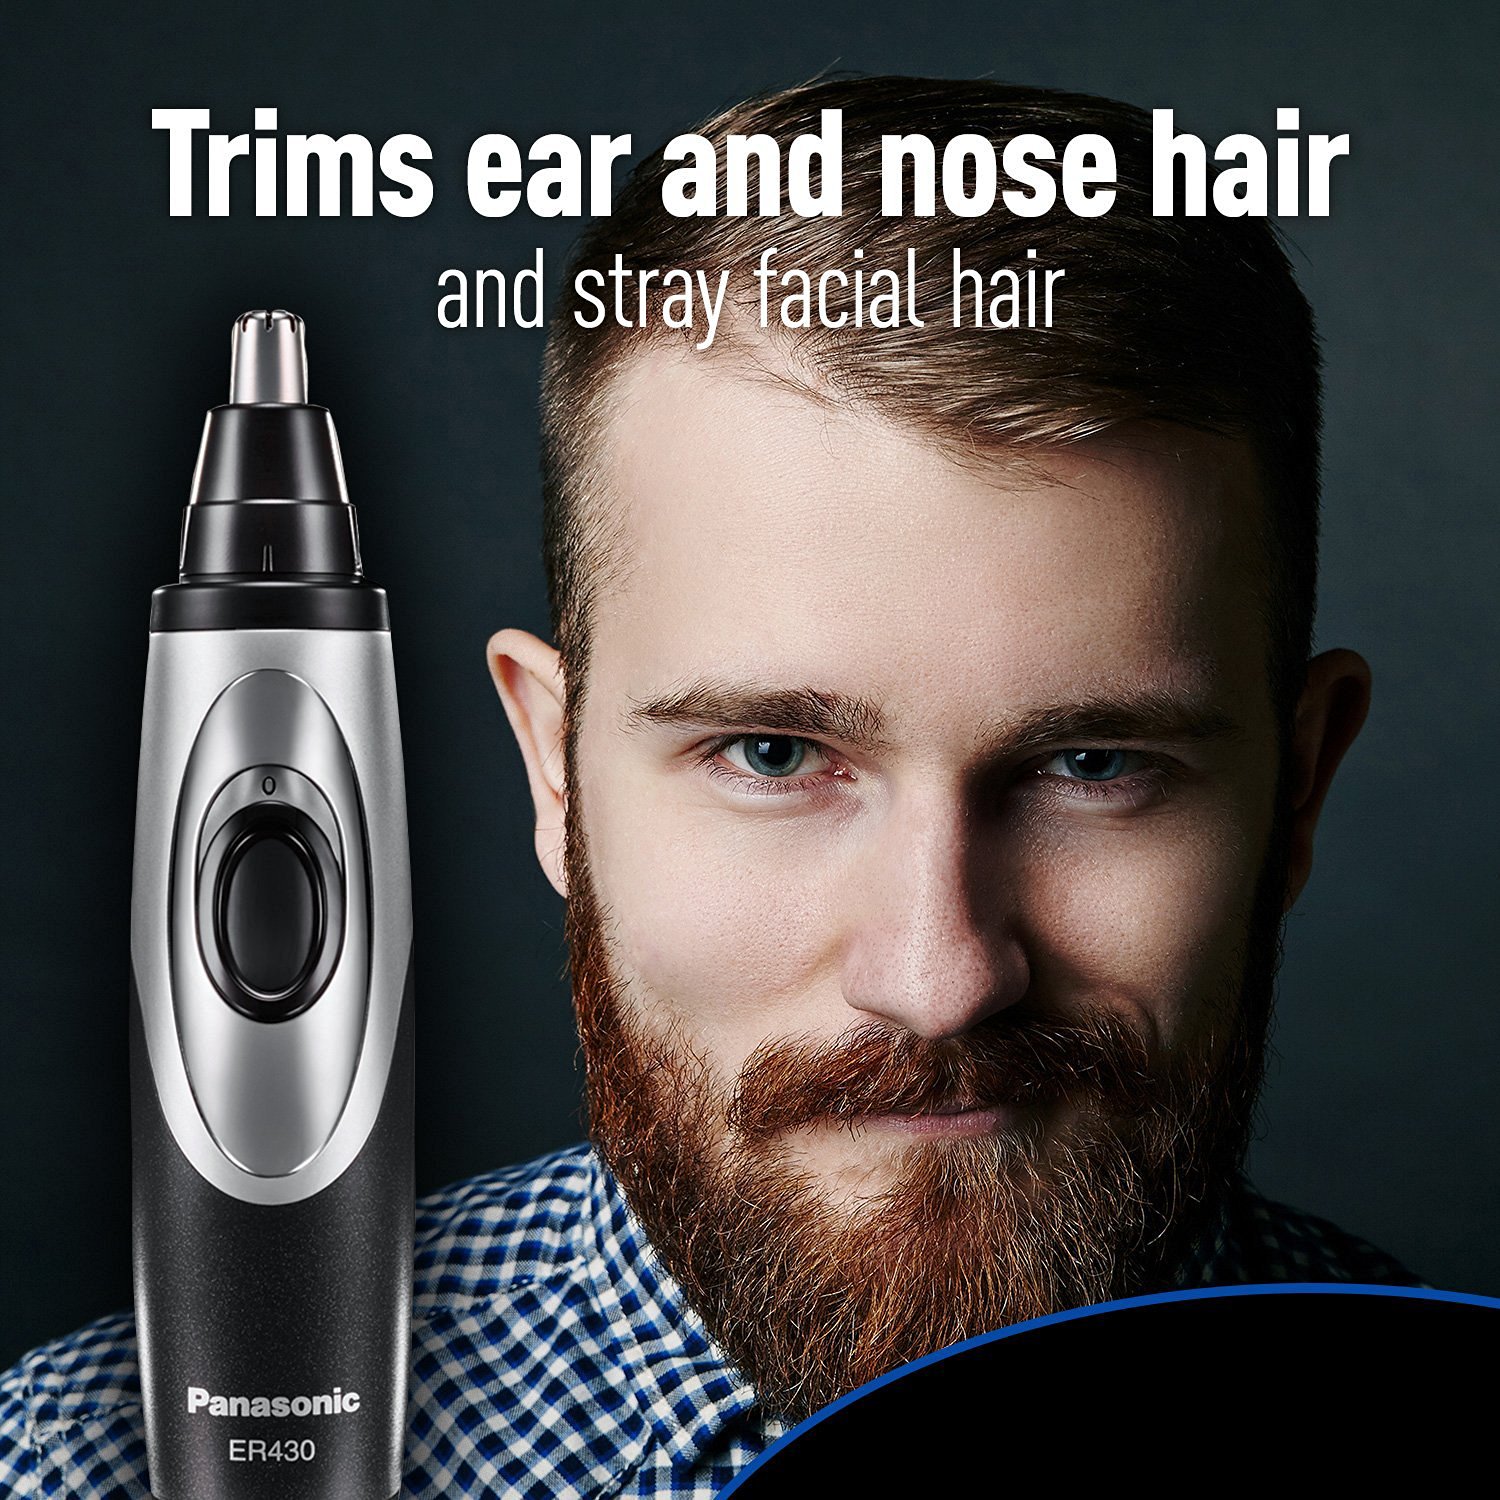 Panasonic Vacuum Wet/Dry Ear and Nose Hair Trimmer-Groomer